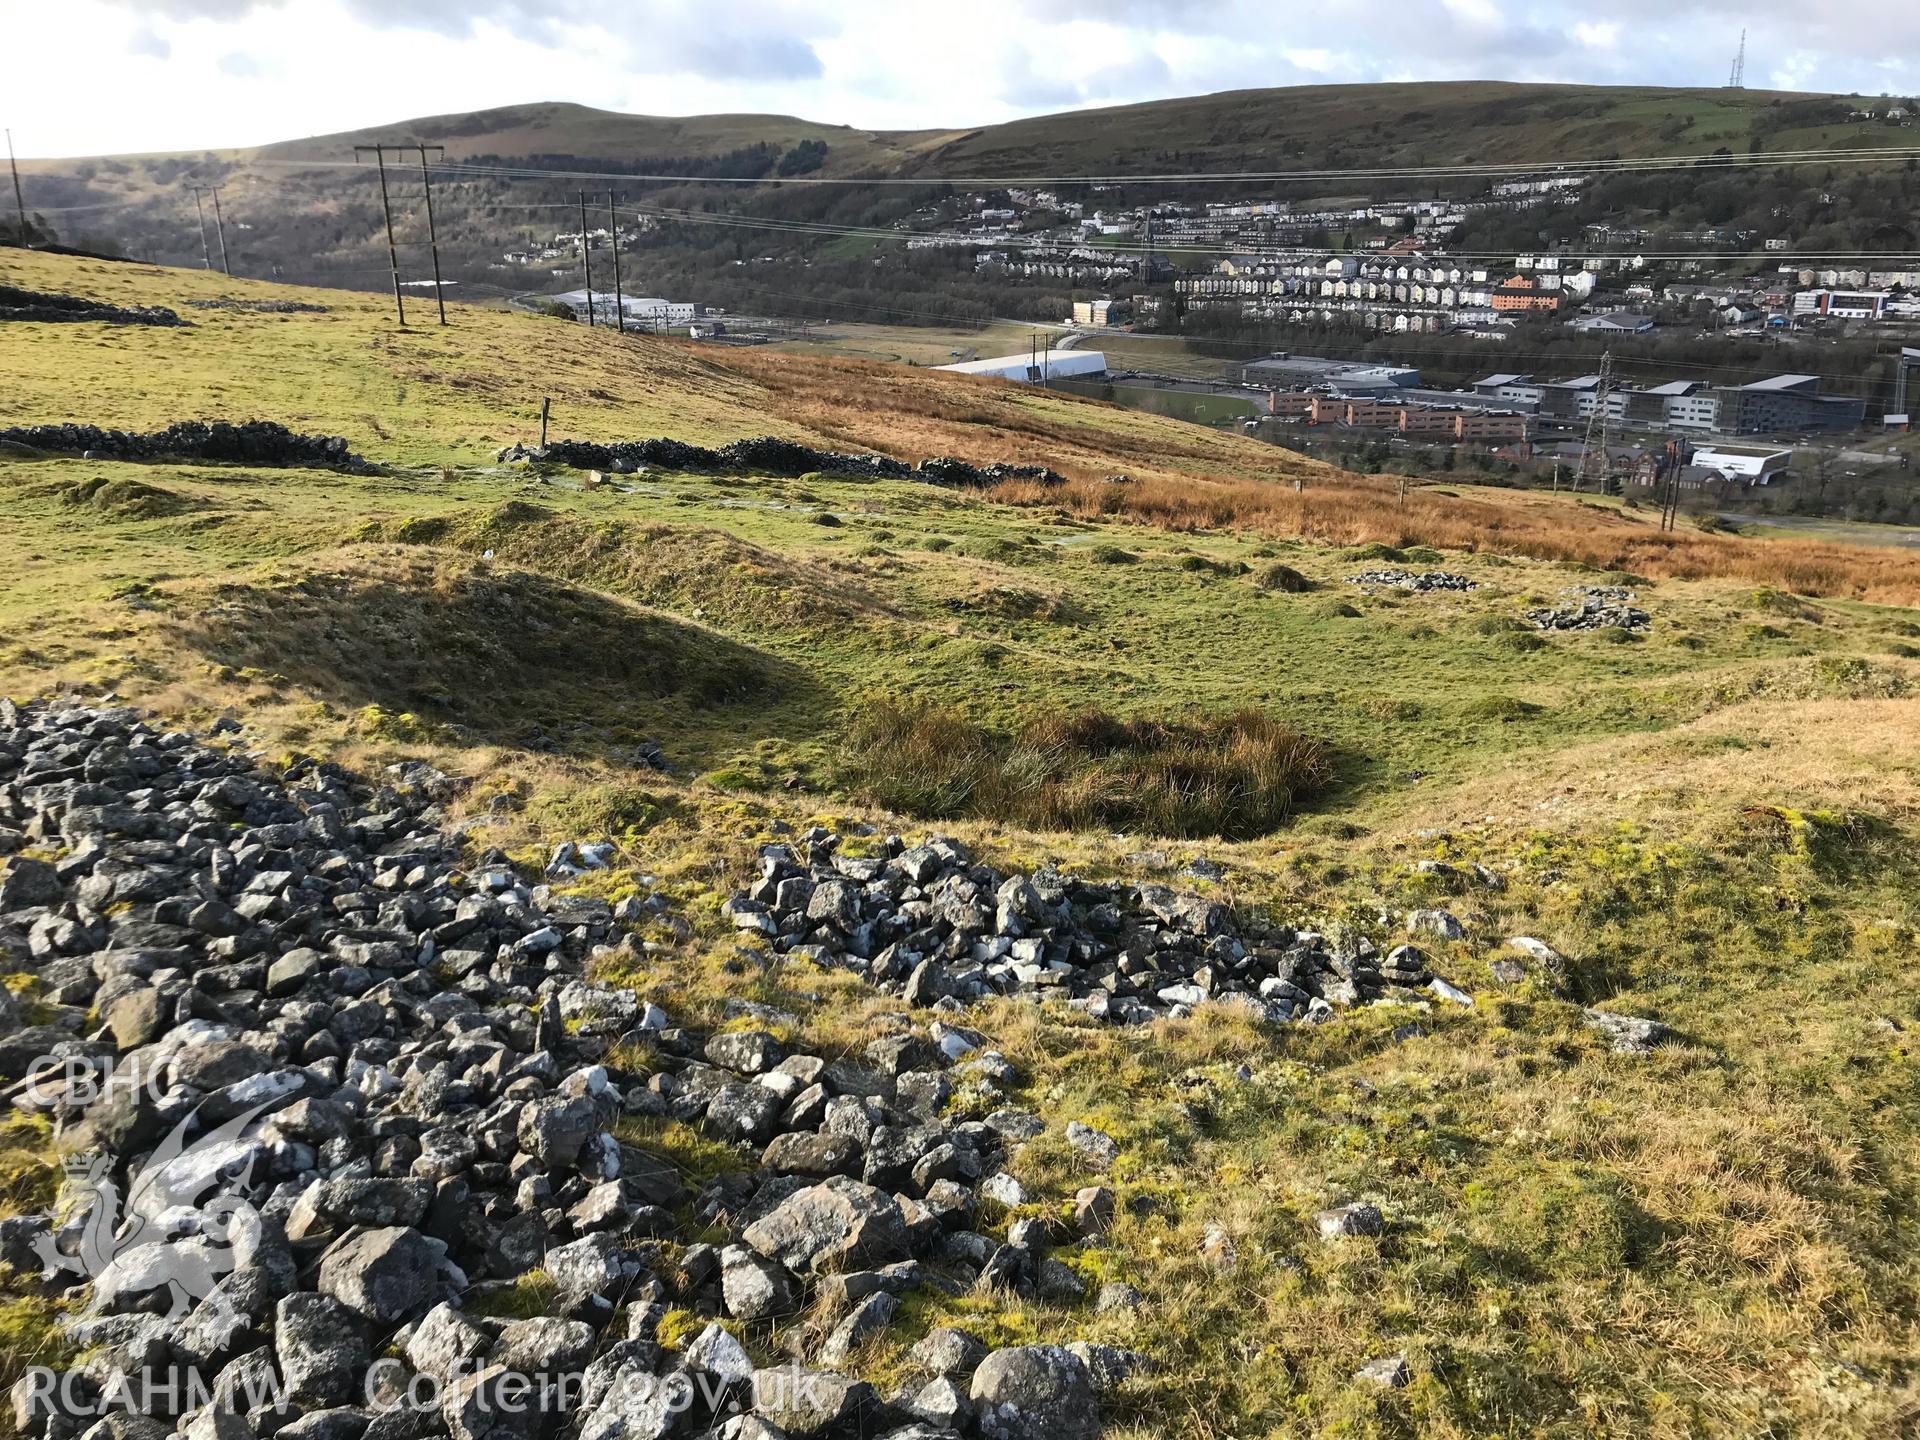 Colour photograph of house platform and field system at Bwlch y Garn, Ebbw Vale, taken by Paul R. Davis on 17th March 2019.